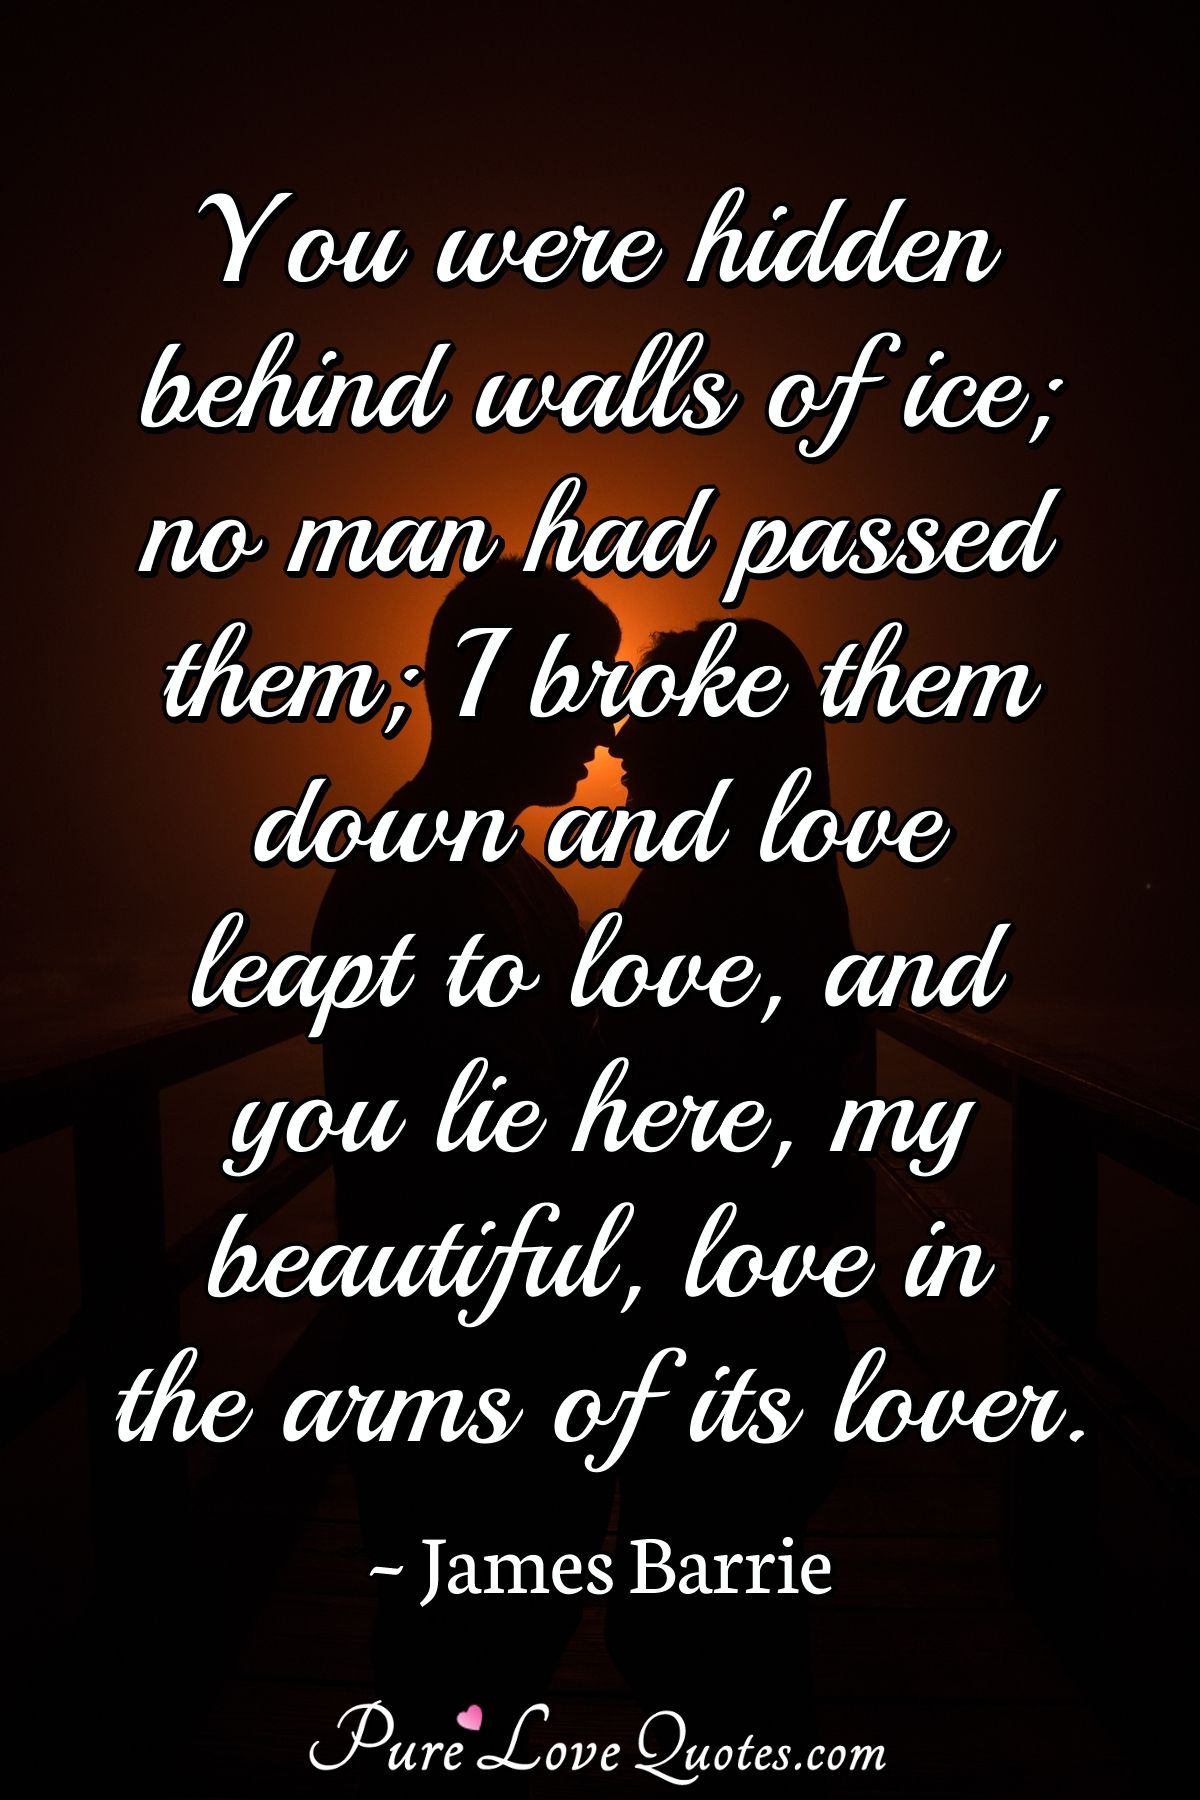 You were hidden behind walls of ice; no man had passed them; I broke them down and love leapt to love, and you lie here, my beautiful, love in the arms of its lover. - James Barrie